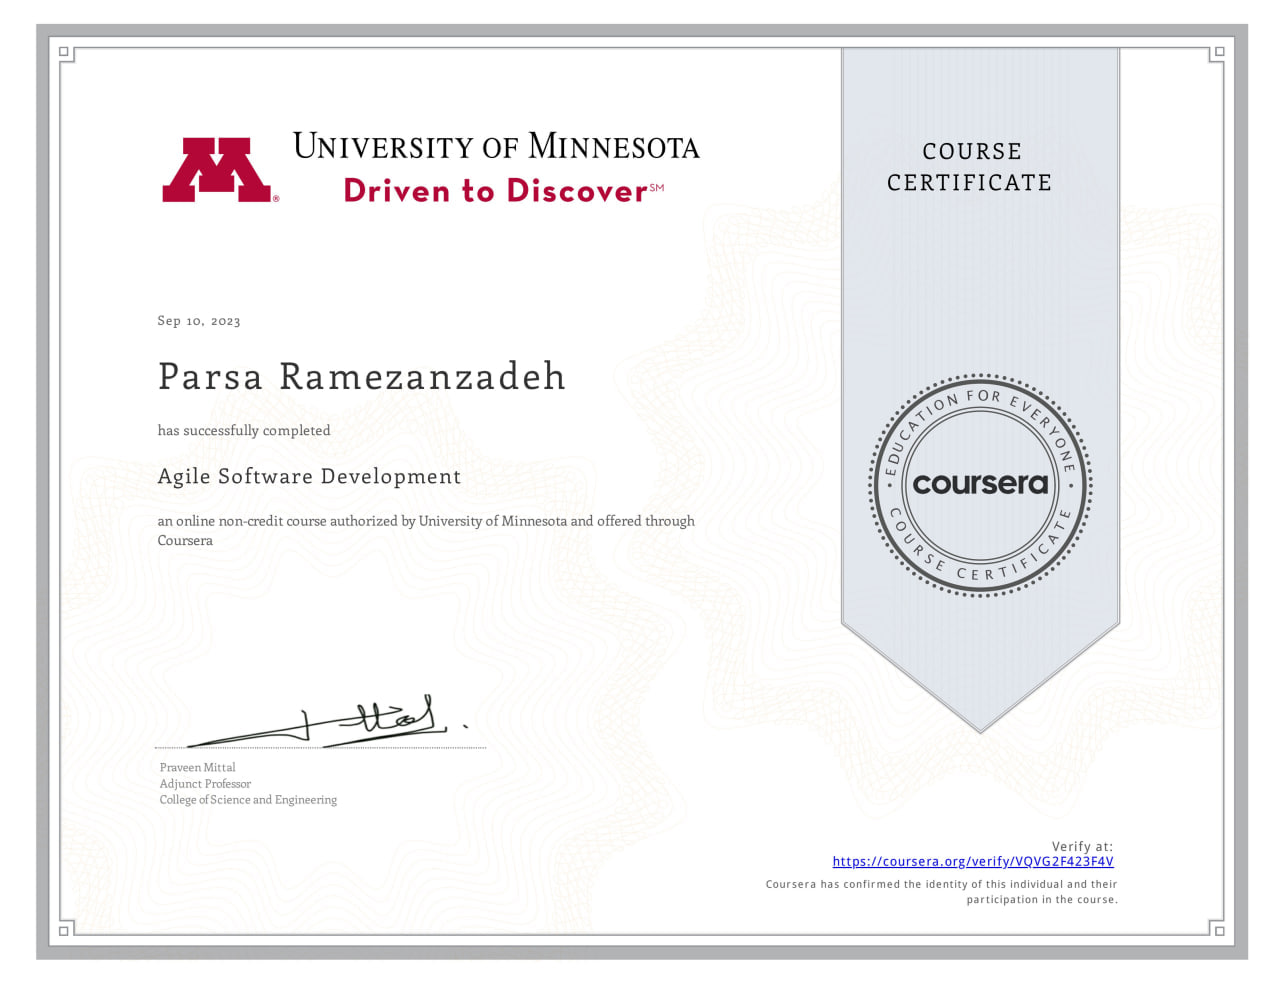 Completion Certificate for Agile Software Development from Coursera by Parsa Ramezanzadeh